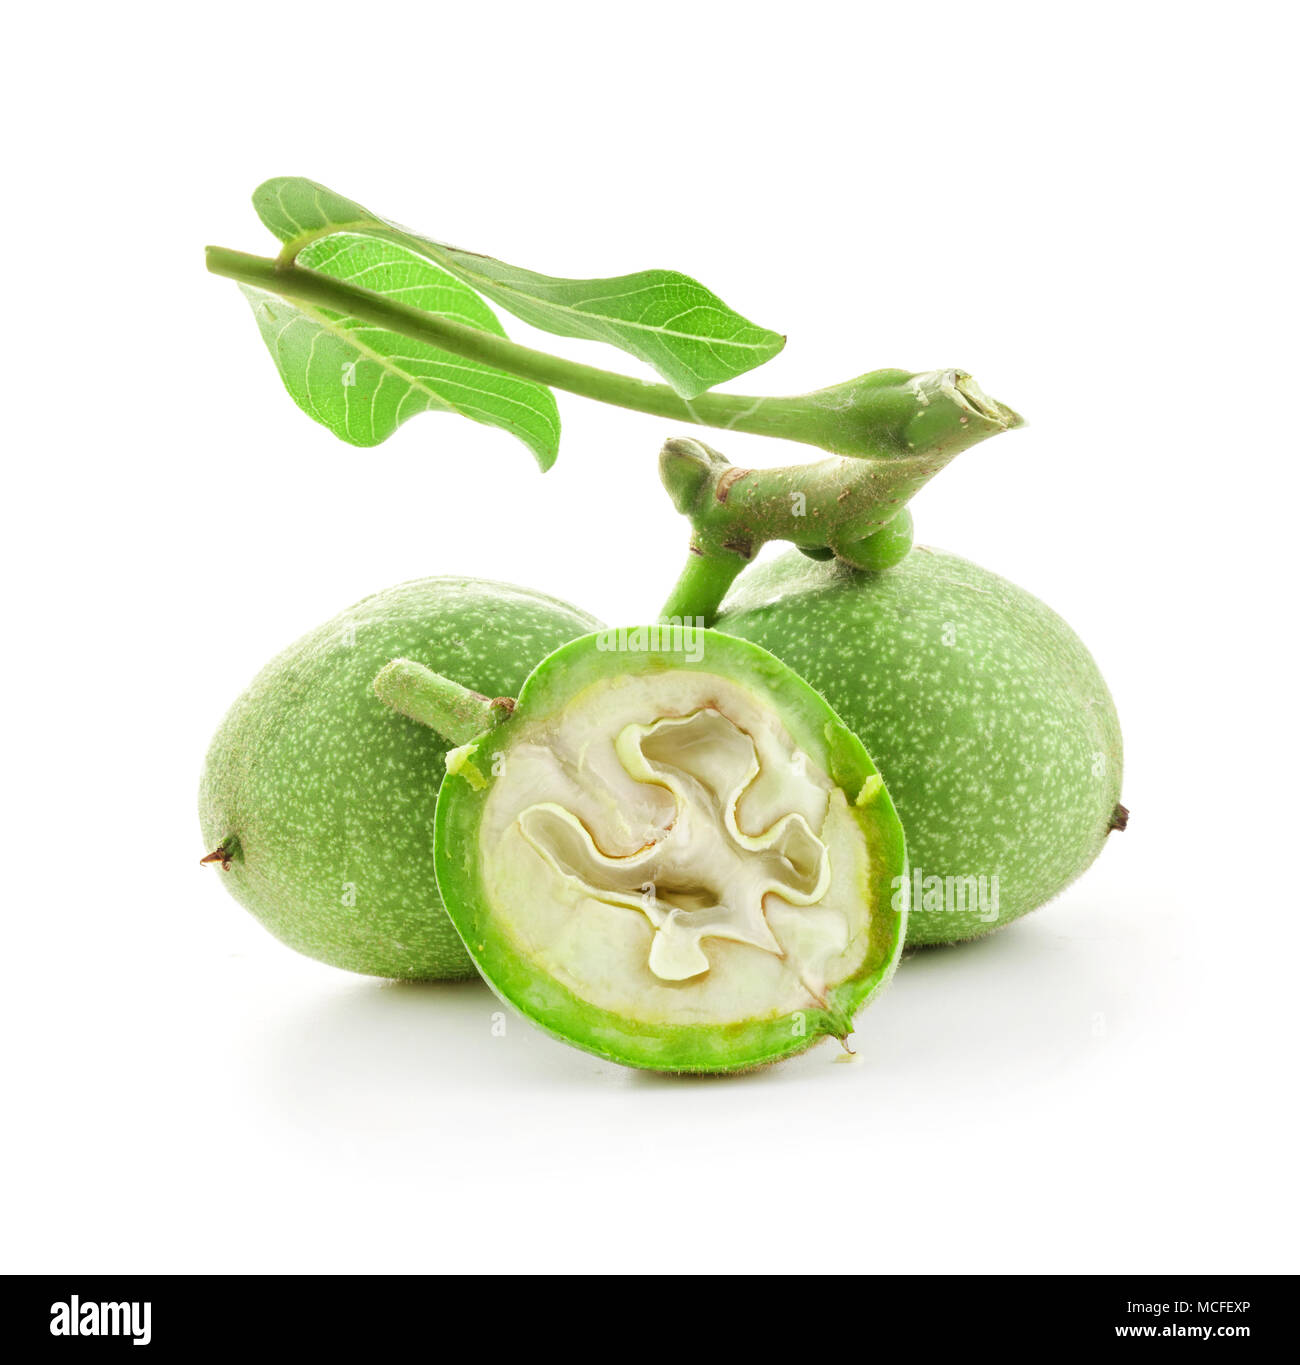 Green walnuts isolated on white background Stock Photo